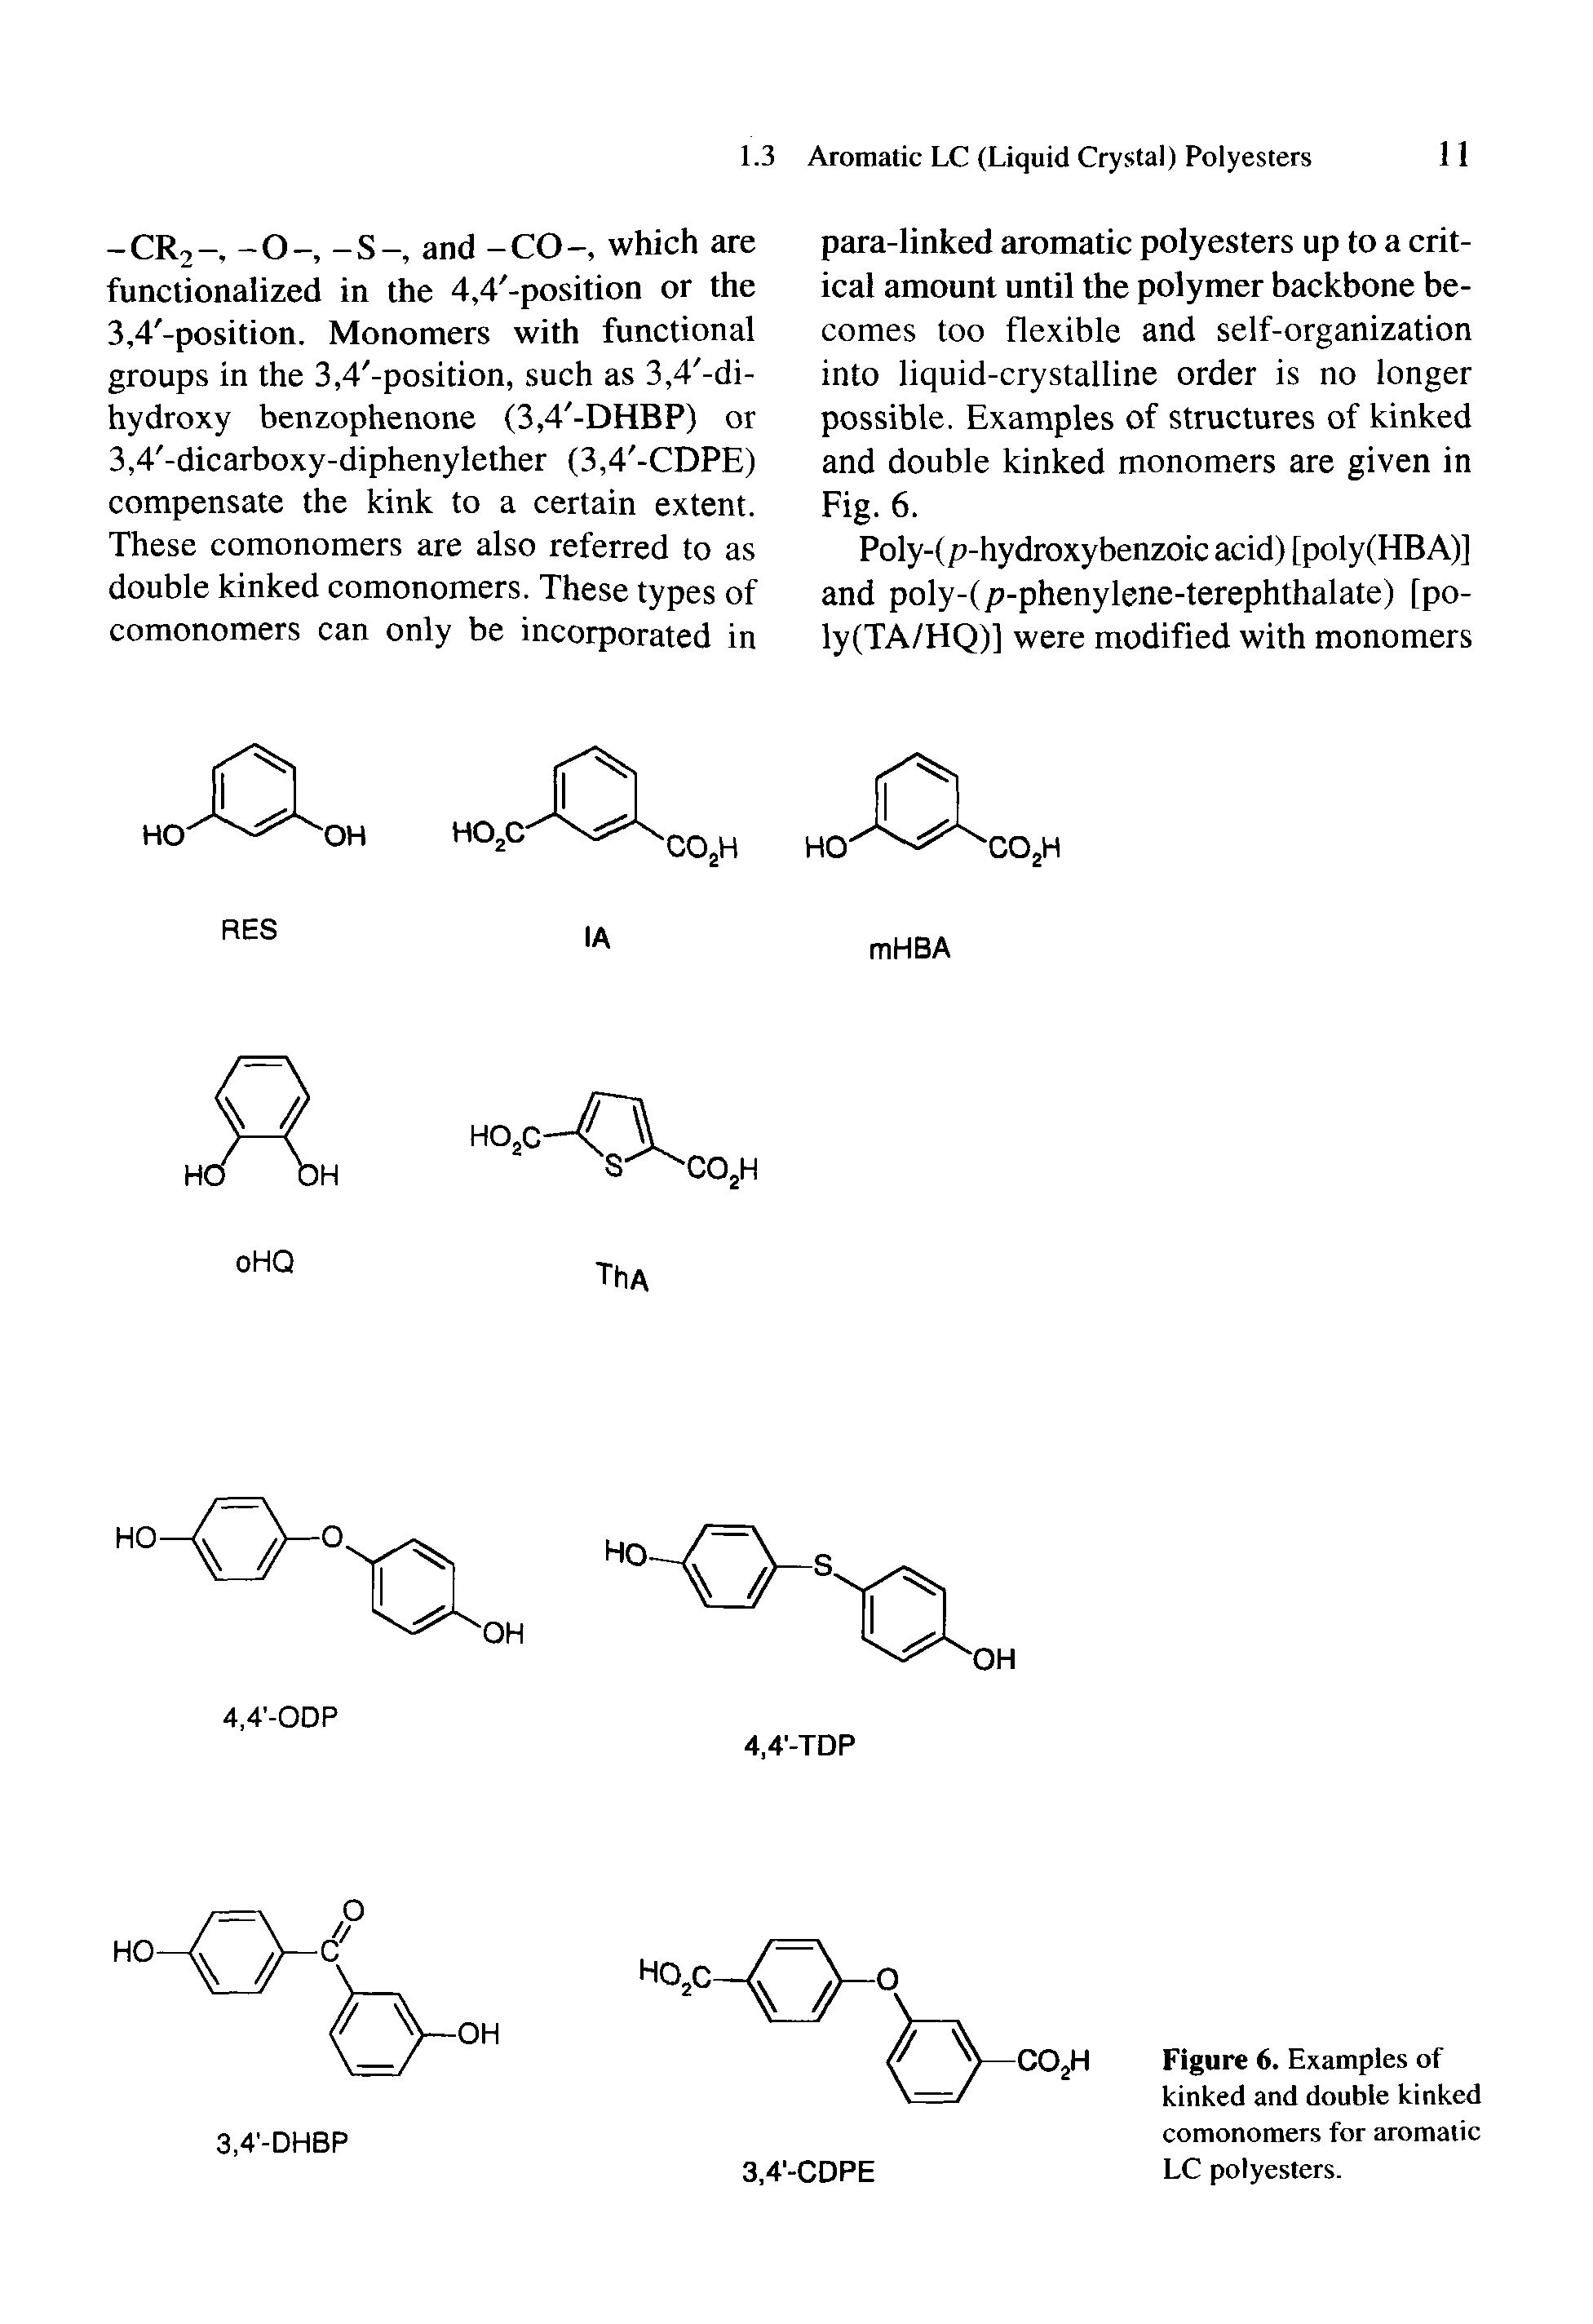 Figure 6. Examples of kinked and double kinked comonomers for aromatic LC polyesters.